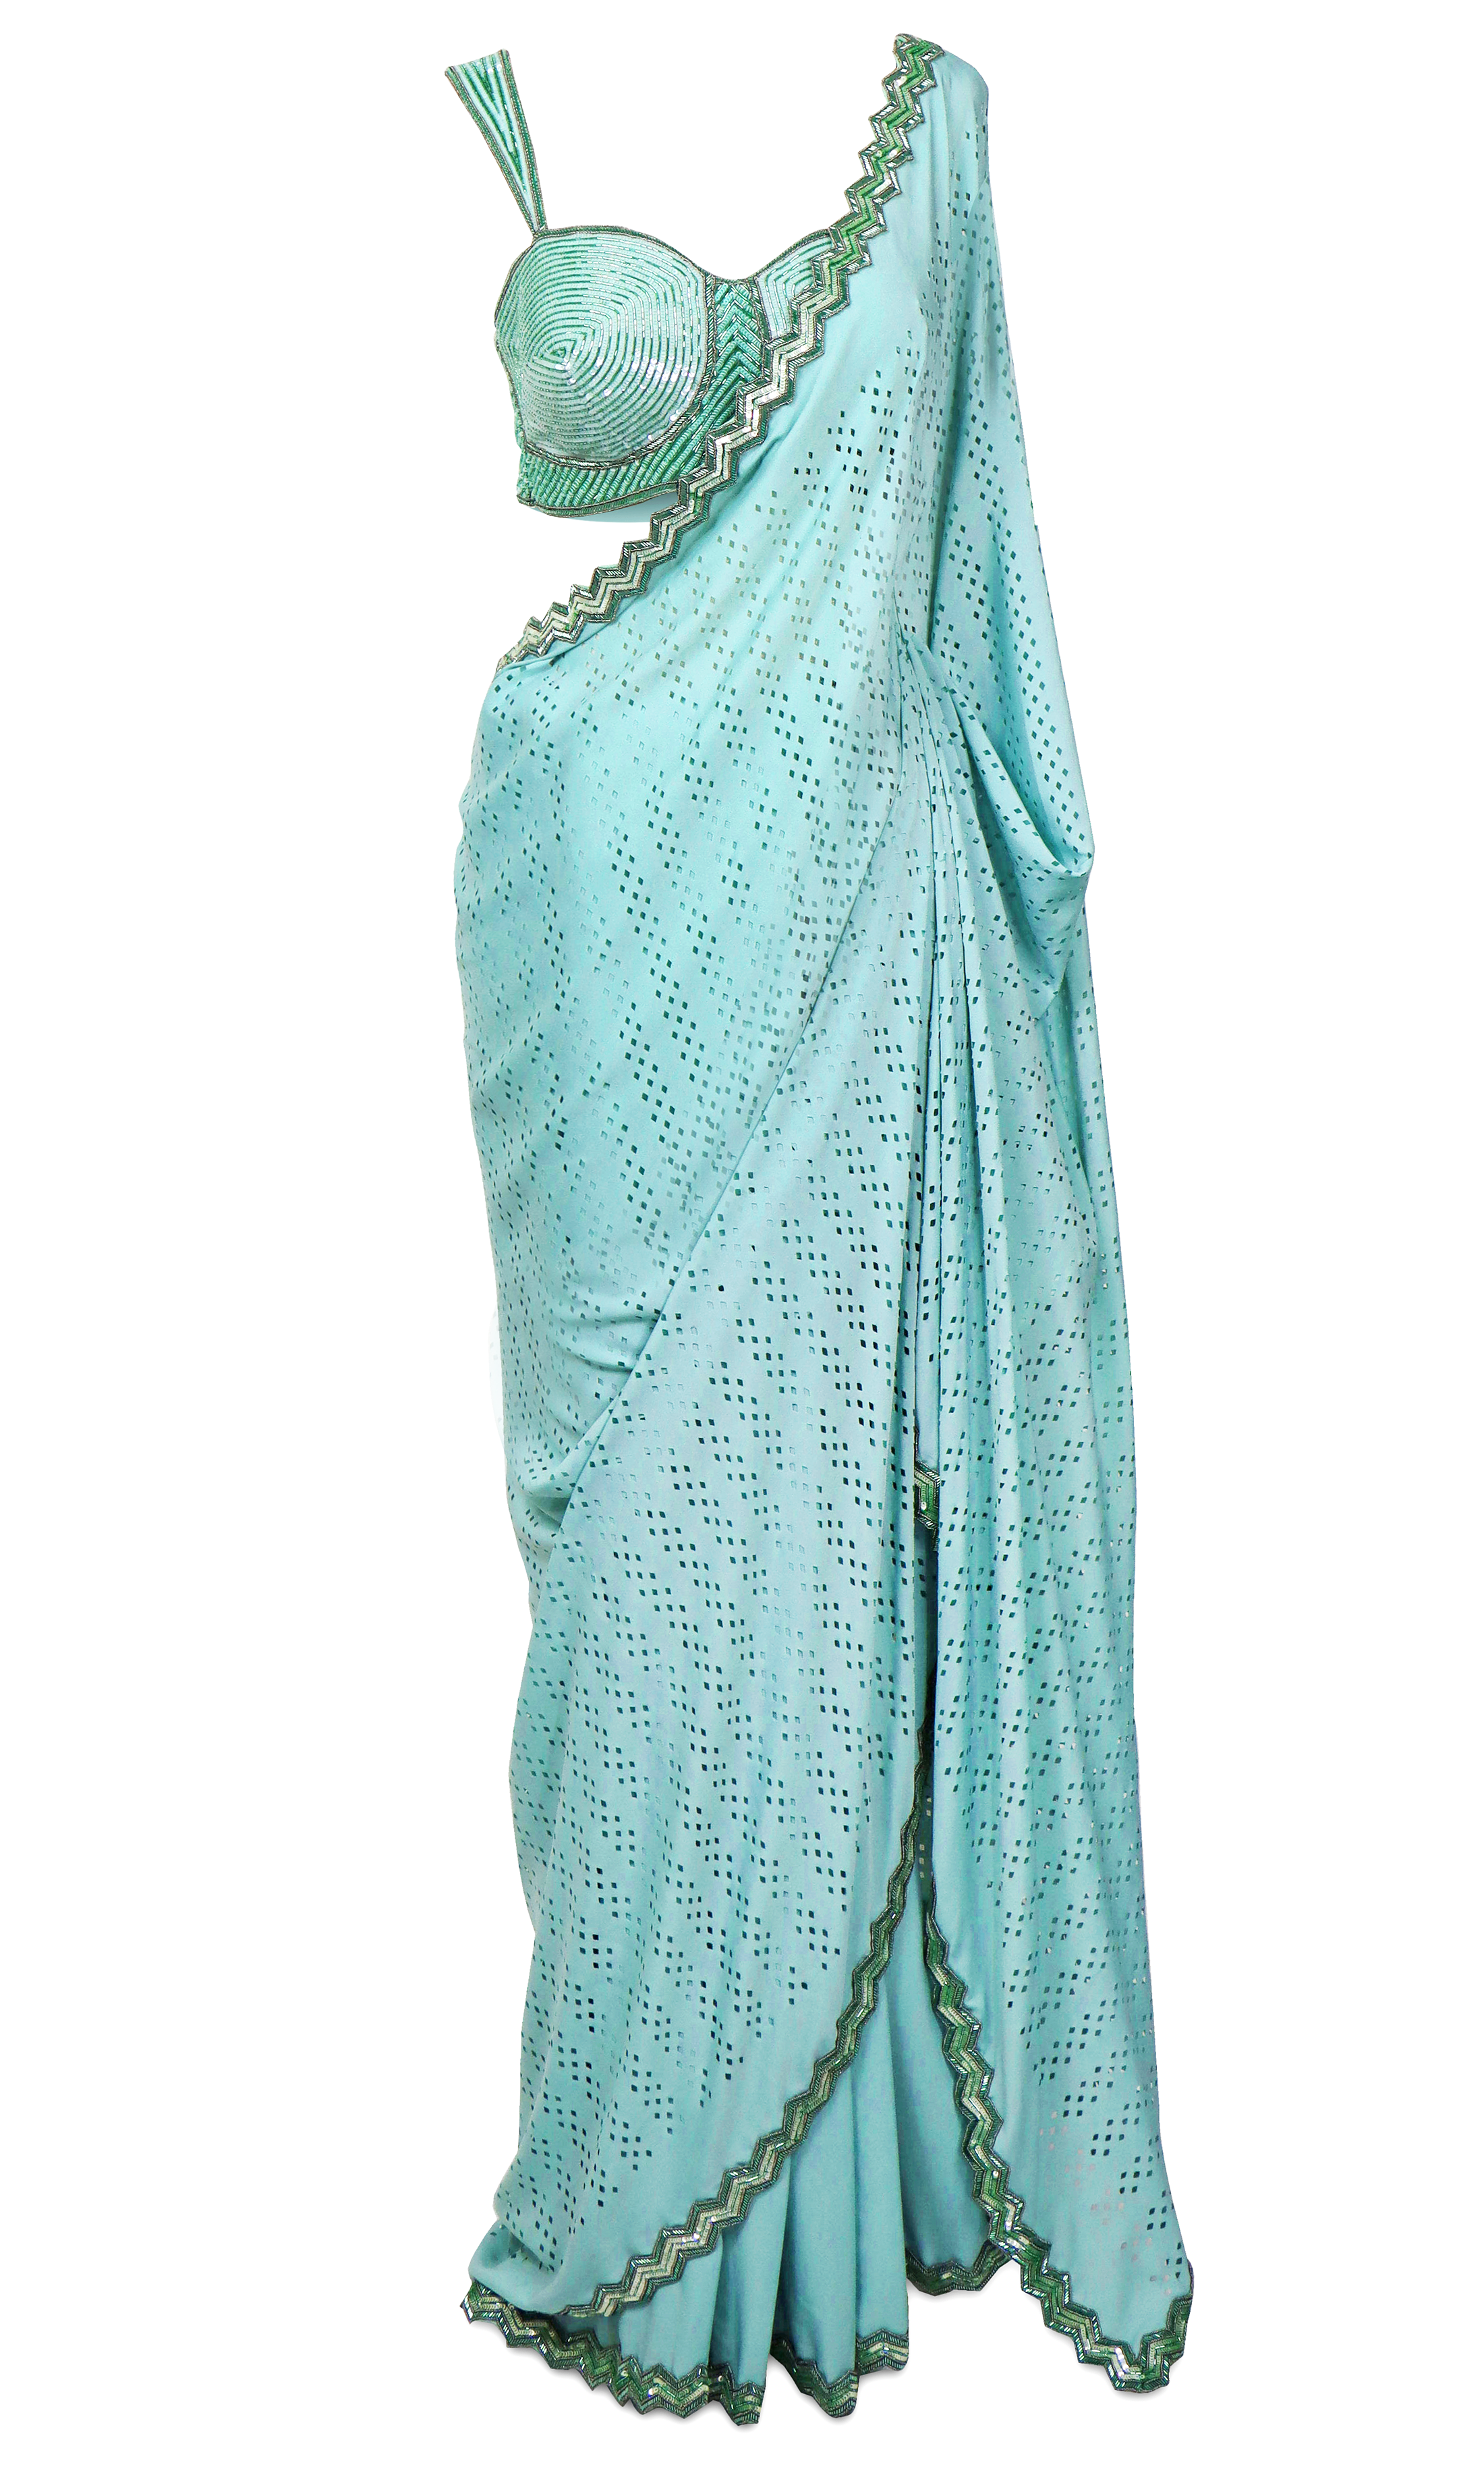 Aqua blue scalloped saree by Preeti S Kapoor with crepe base & hand embroidery. Paired with a adjustable Blouse.